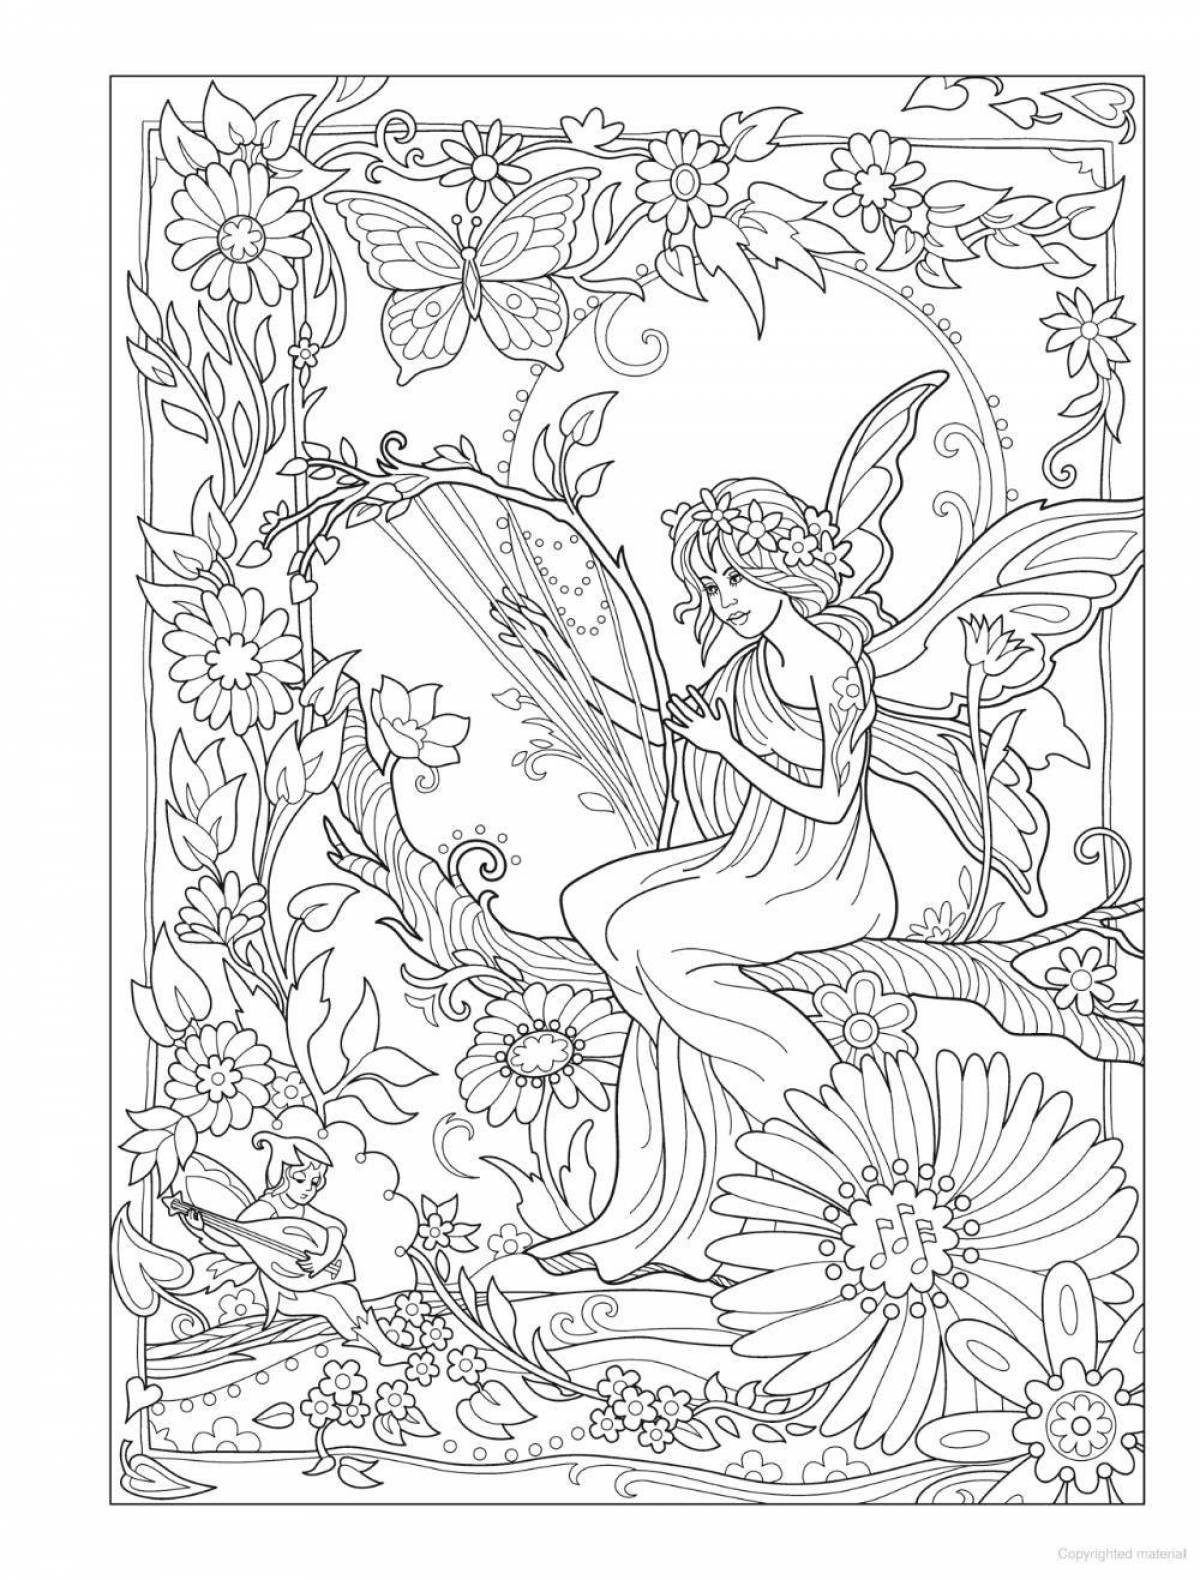 Adorable adult coloring book